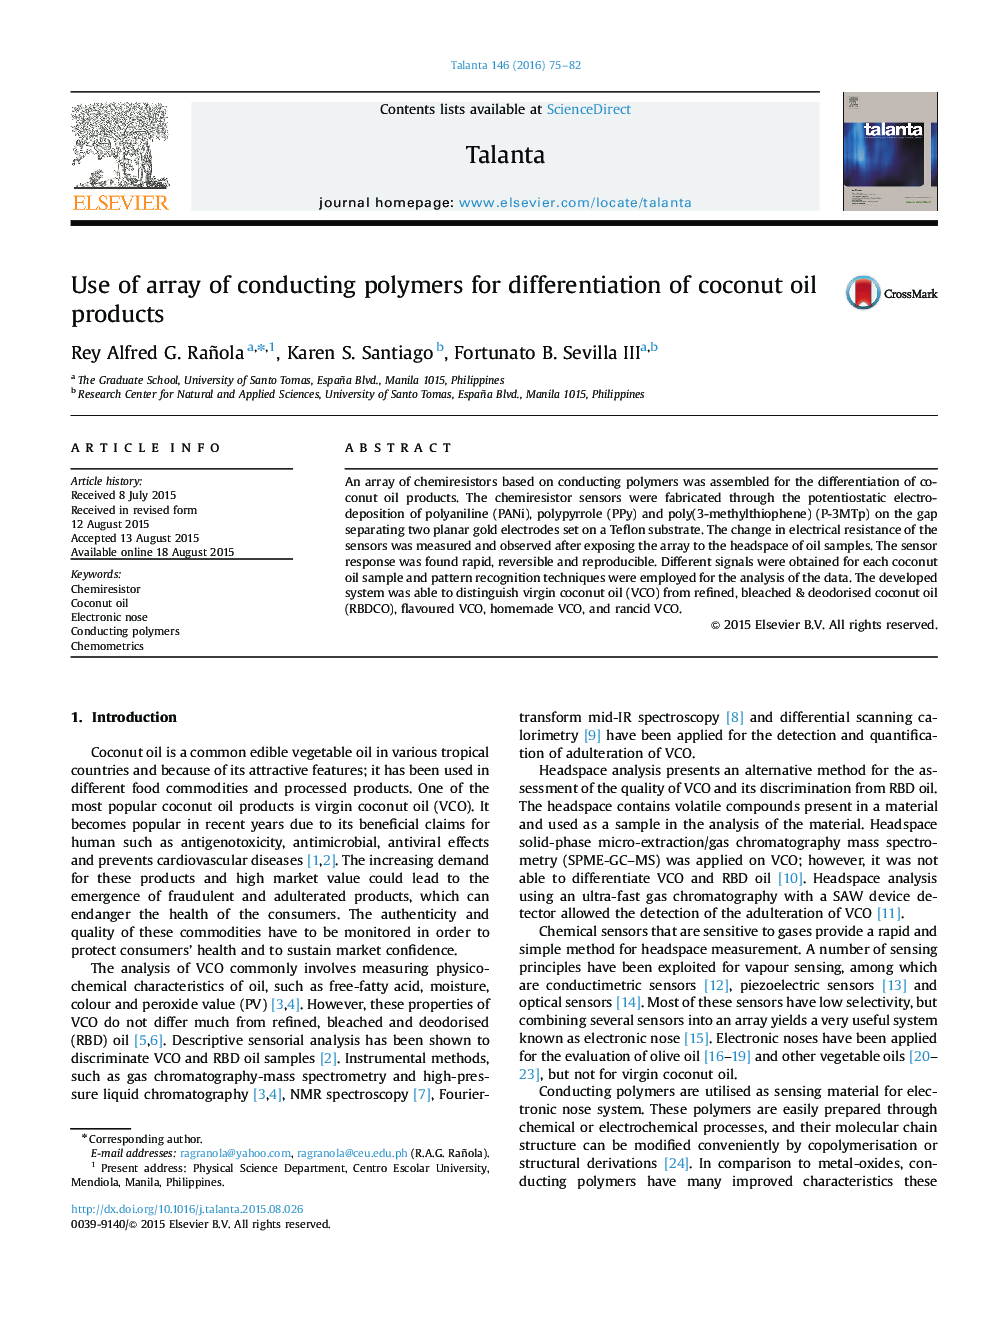 Use of array of conducting polymers for differentiation of coconut oil products